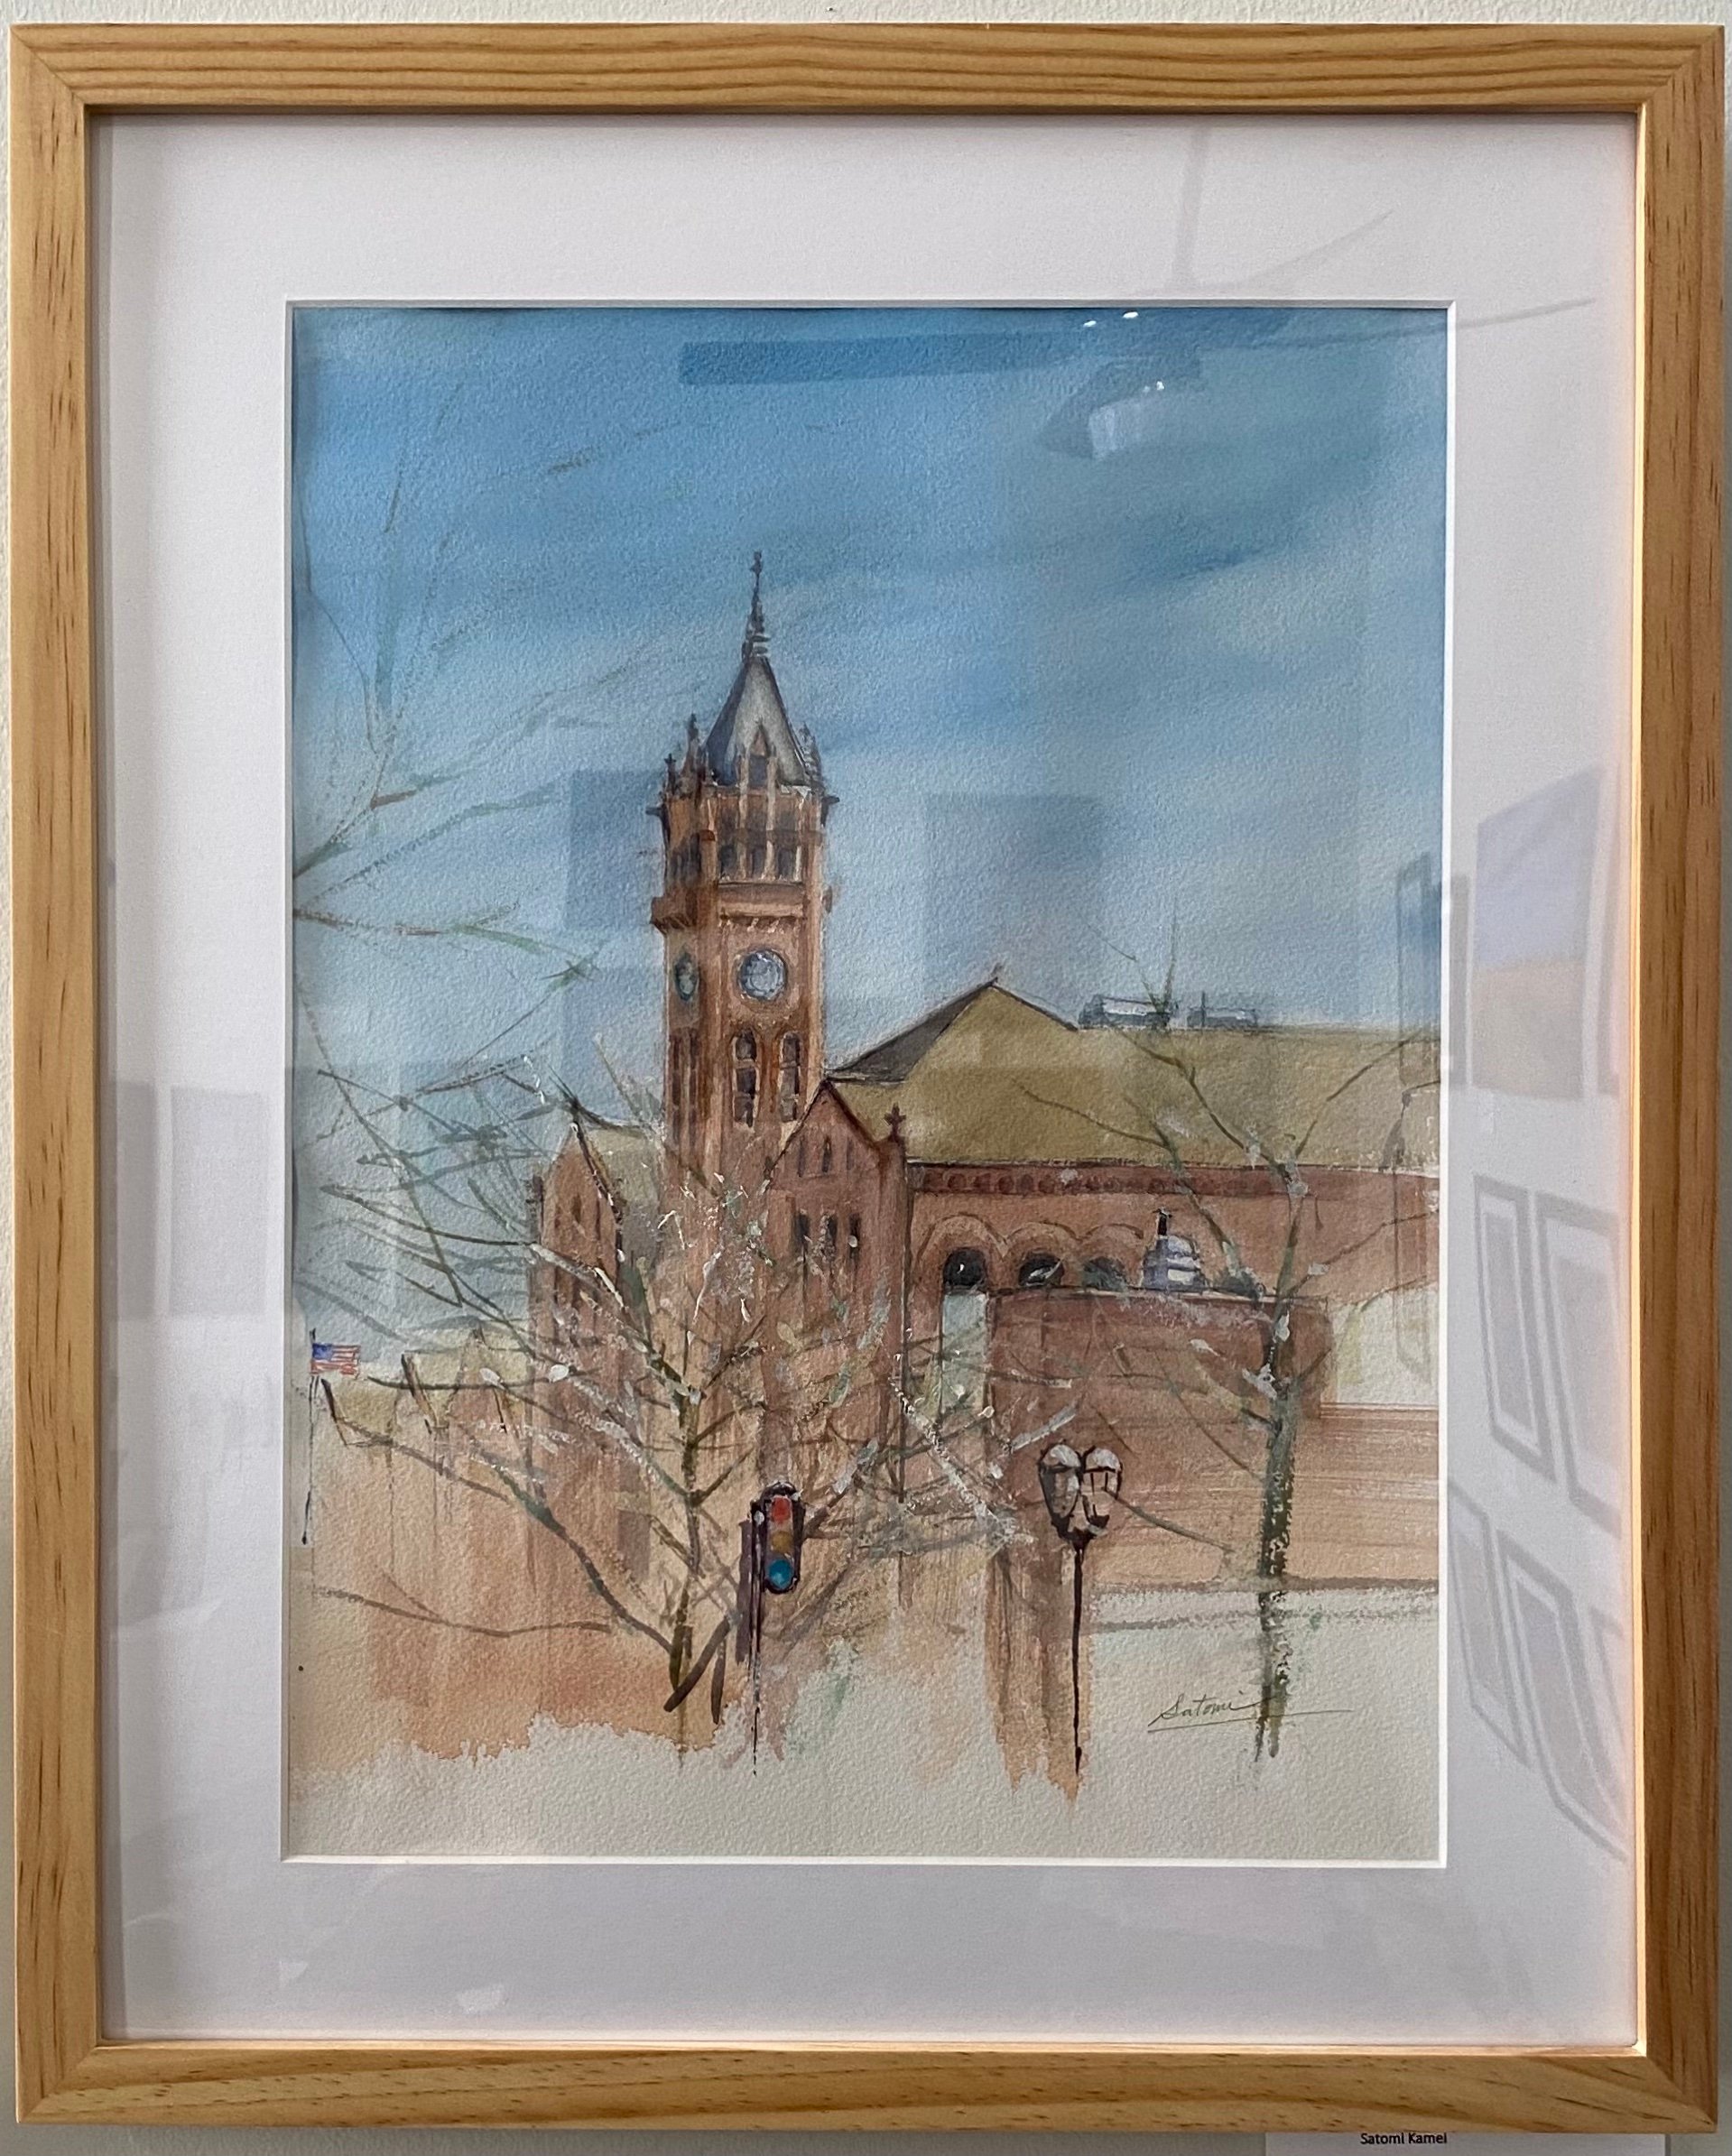 Champaign County Courthouse
Watercolor
11.5" X 16"
$225.